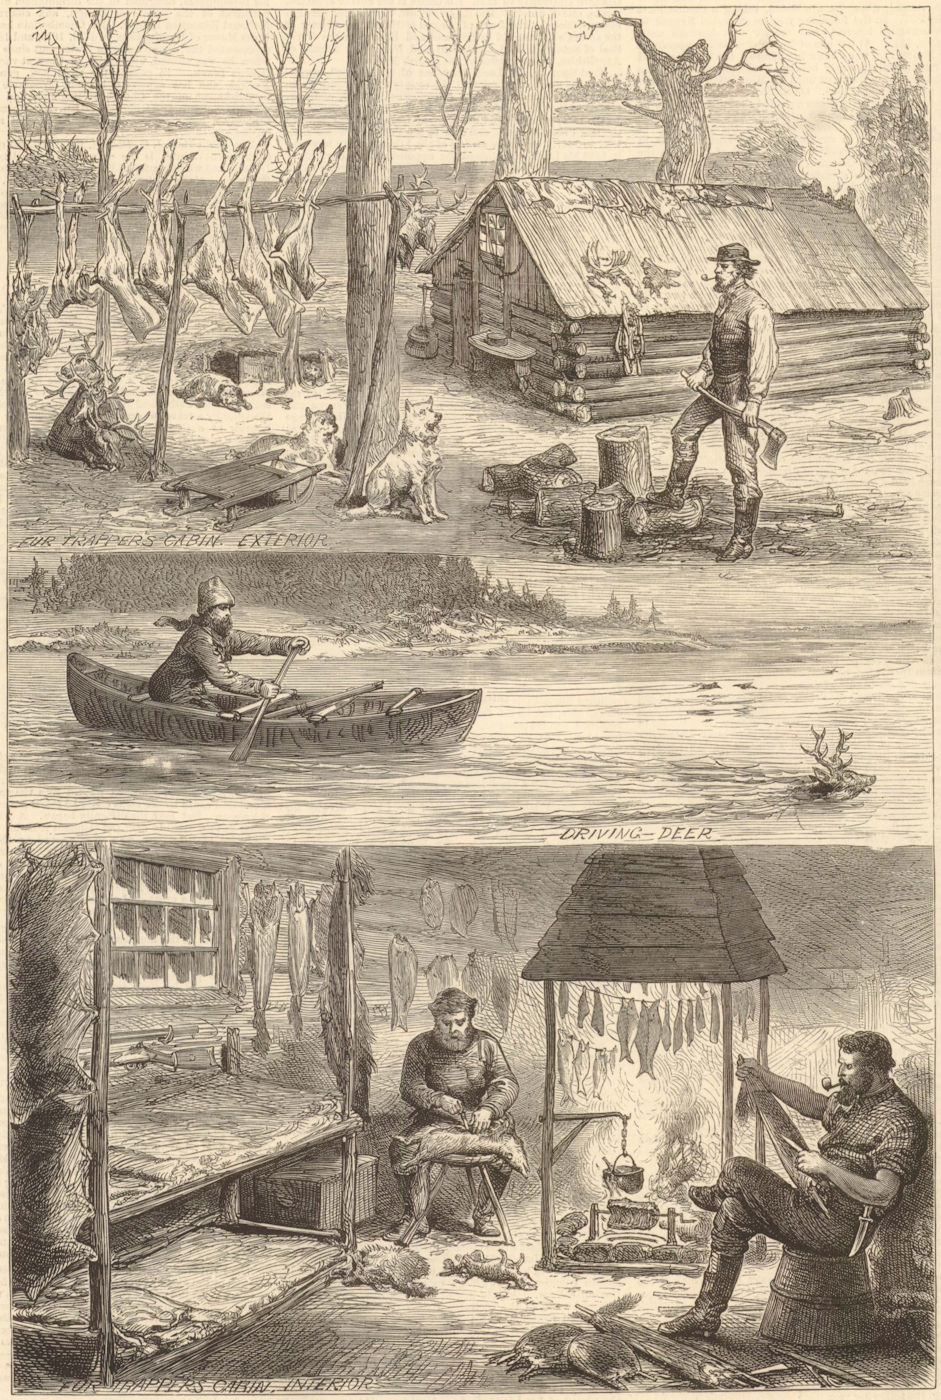 Associate Product Fur trappers in the backwoods of Canada 1880 antique ILN full page print